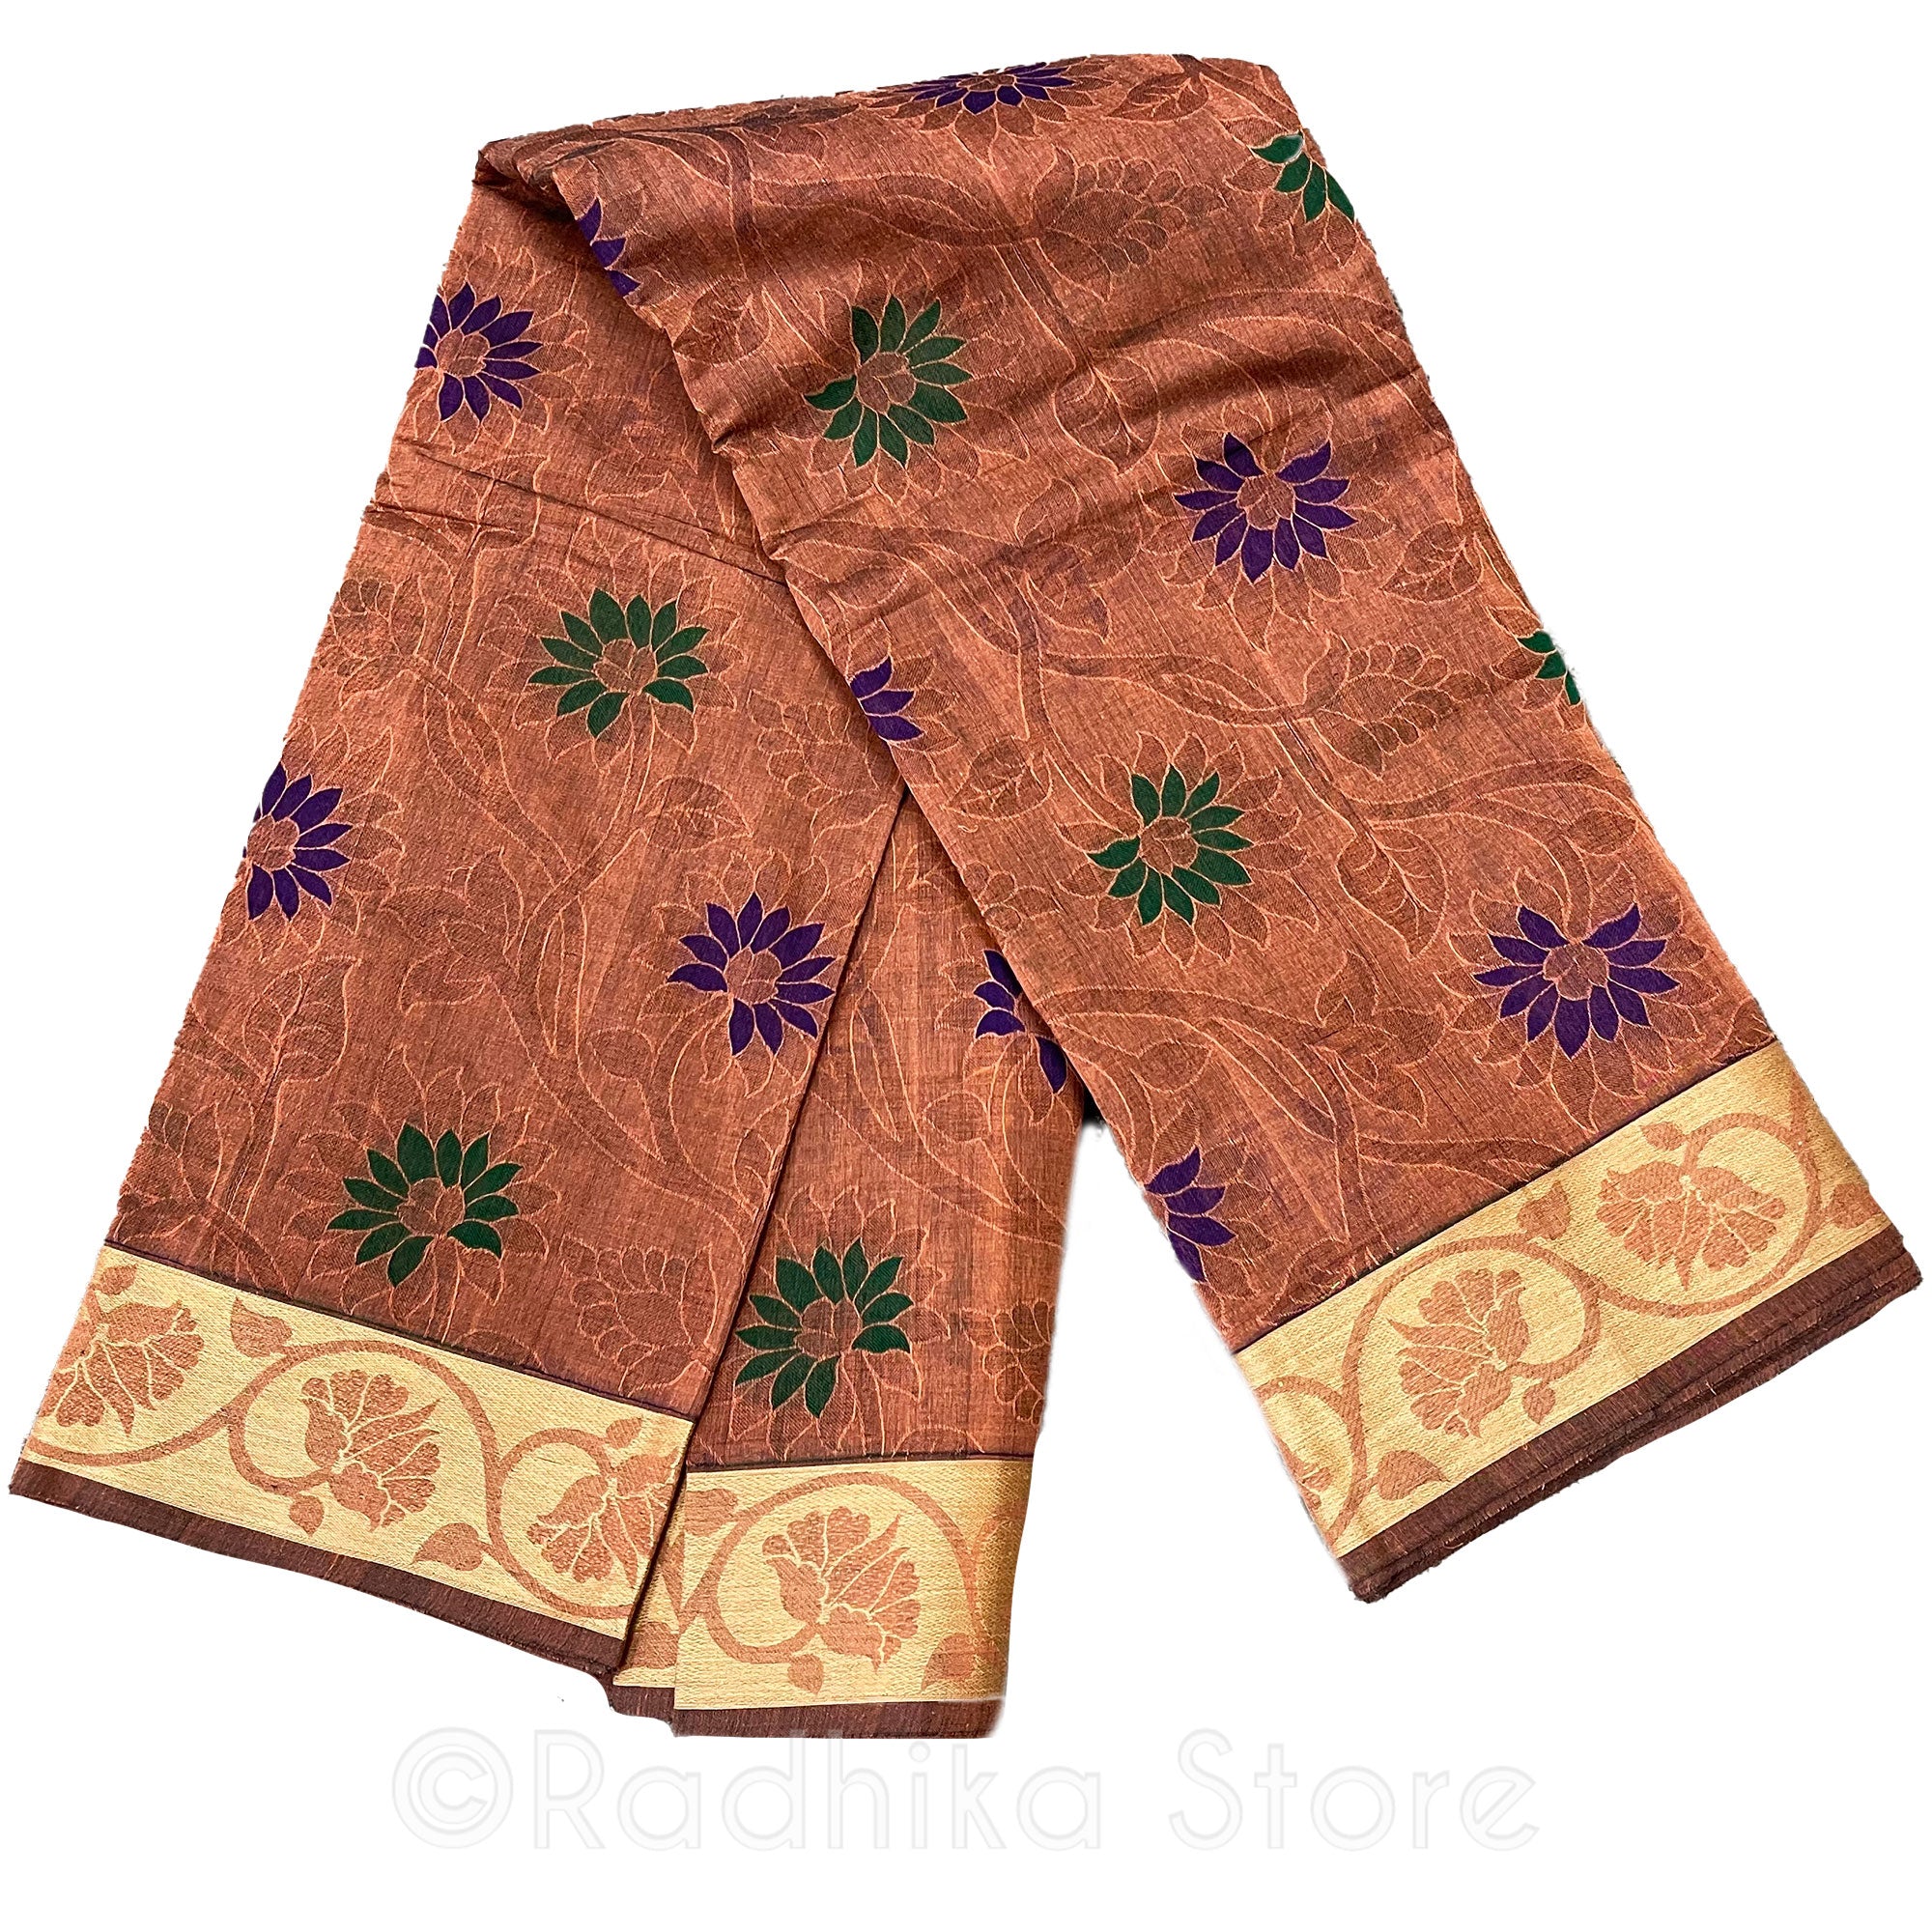 Vrindavan Forest Flowers- Earthy With Blue and Green - Cotton Silk Saree